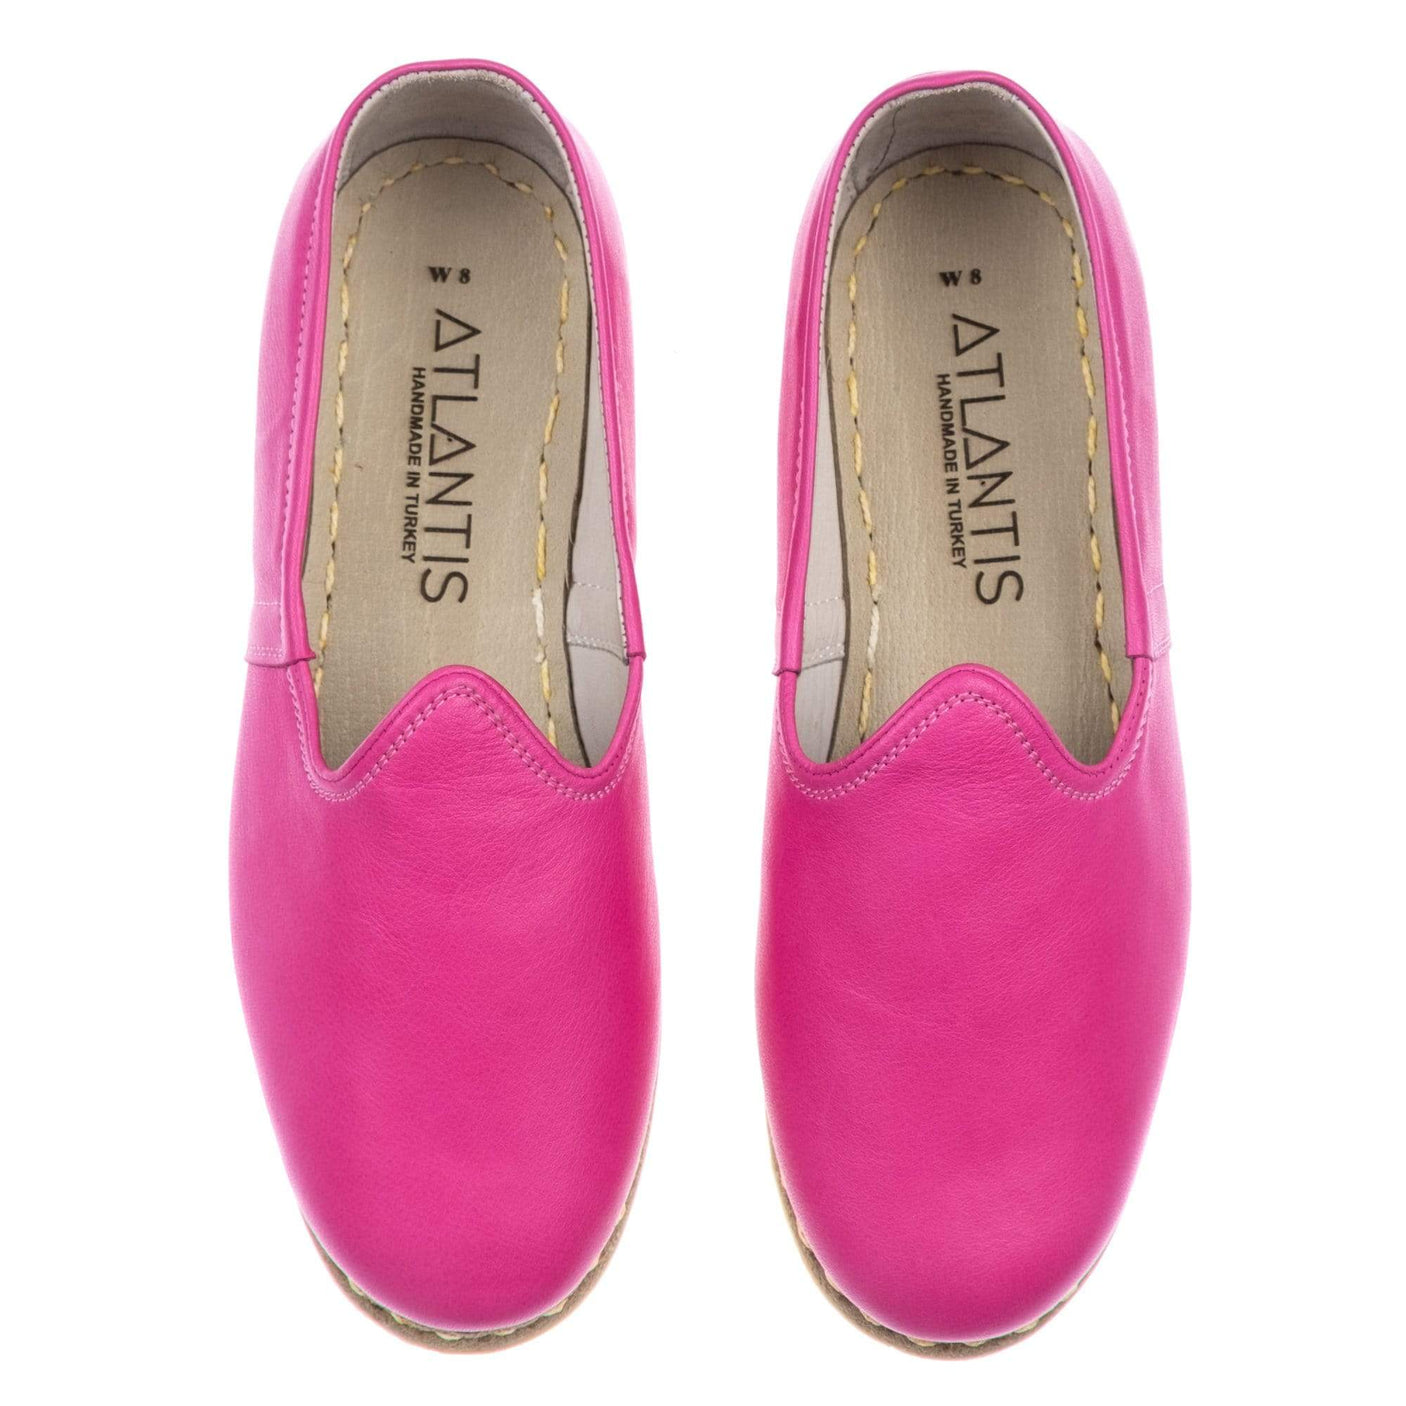 Women's Pink Slip On Shoes